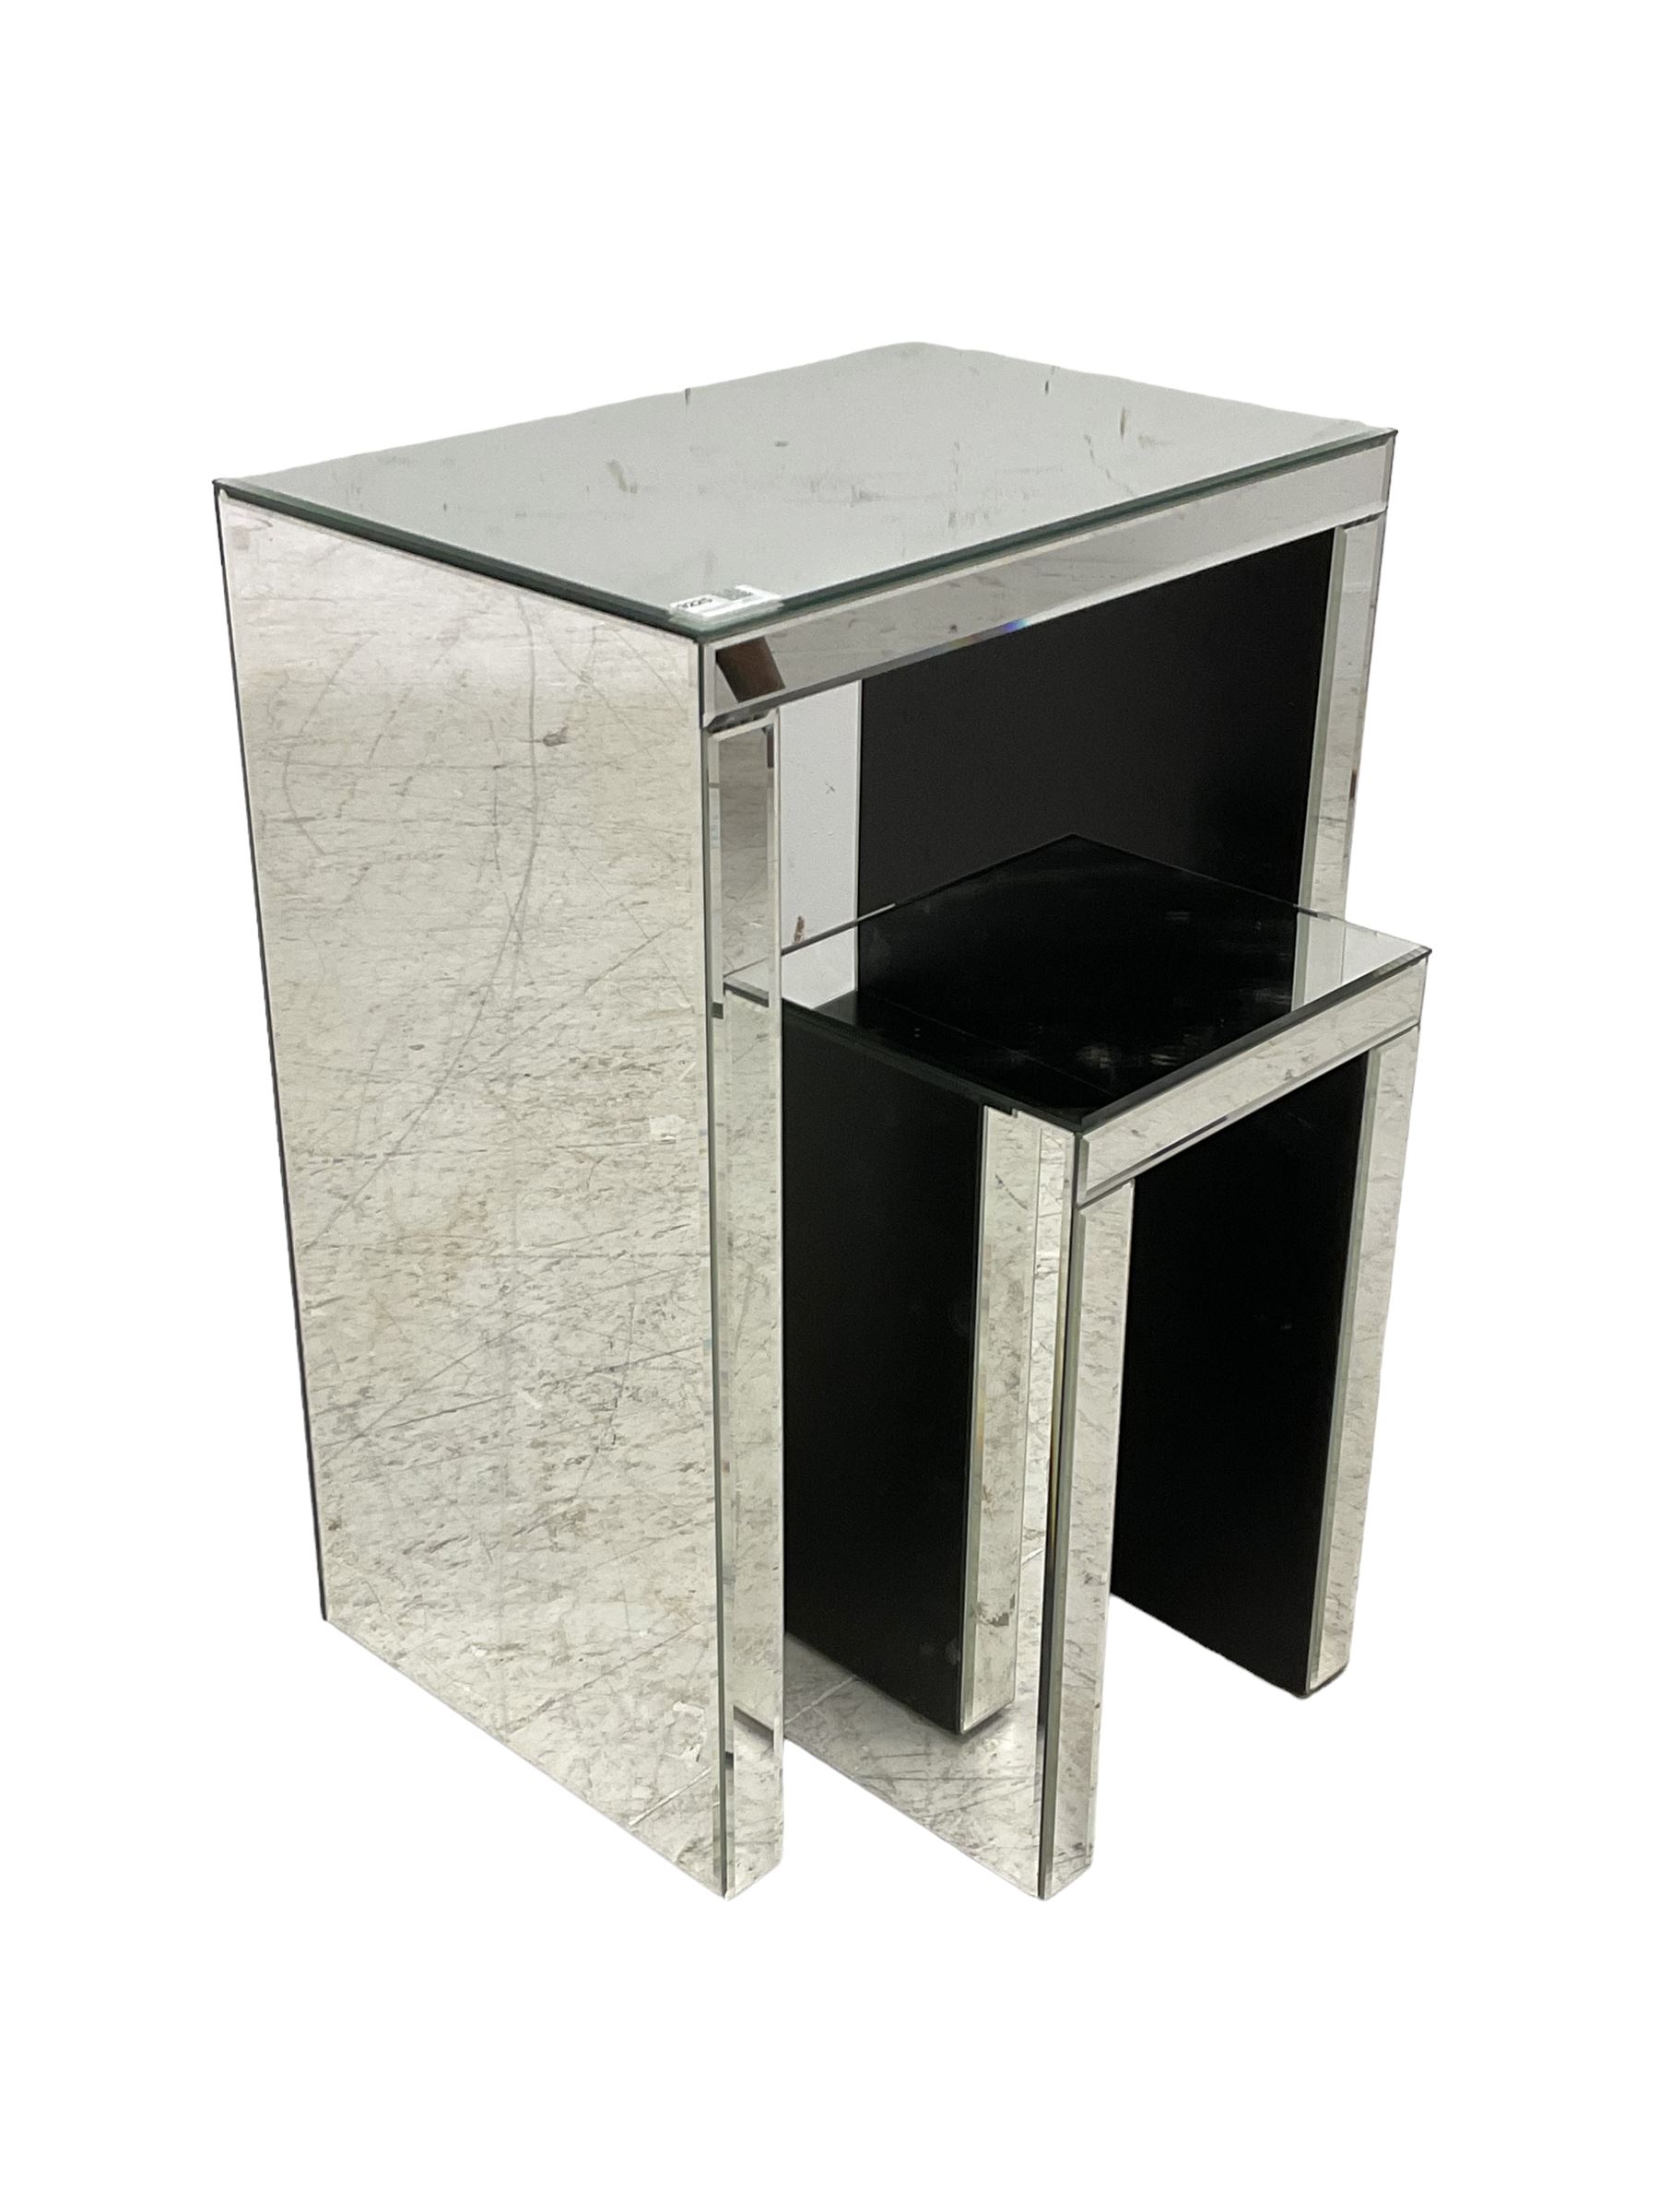 Two nesting mirrored tables - Image 2 of 2